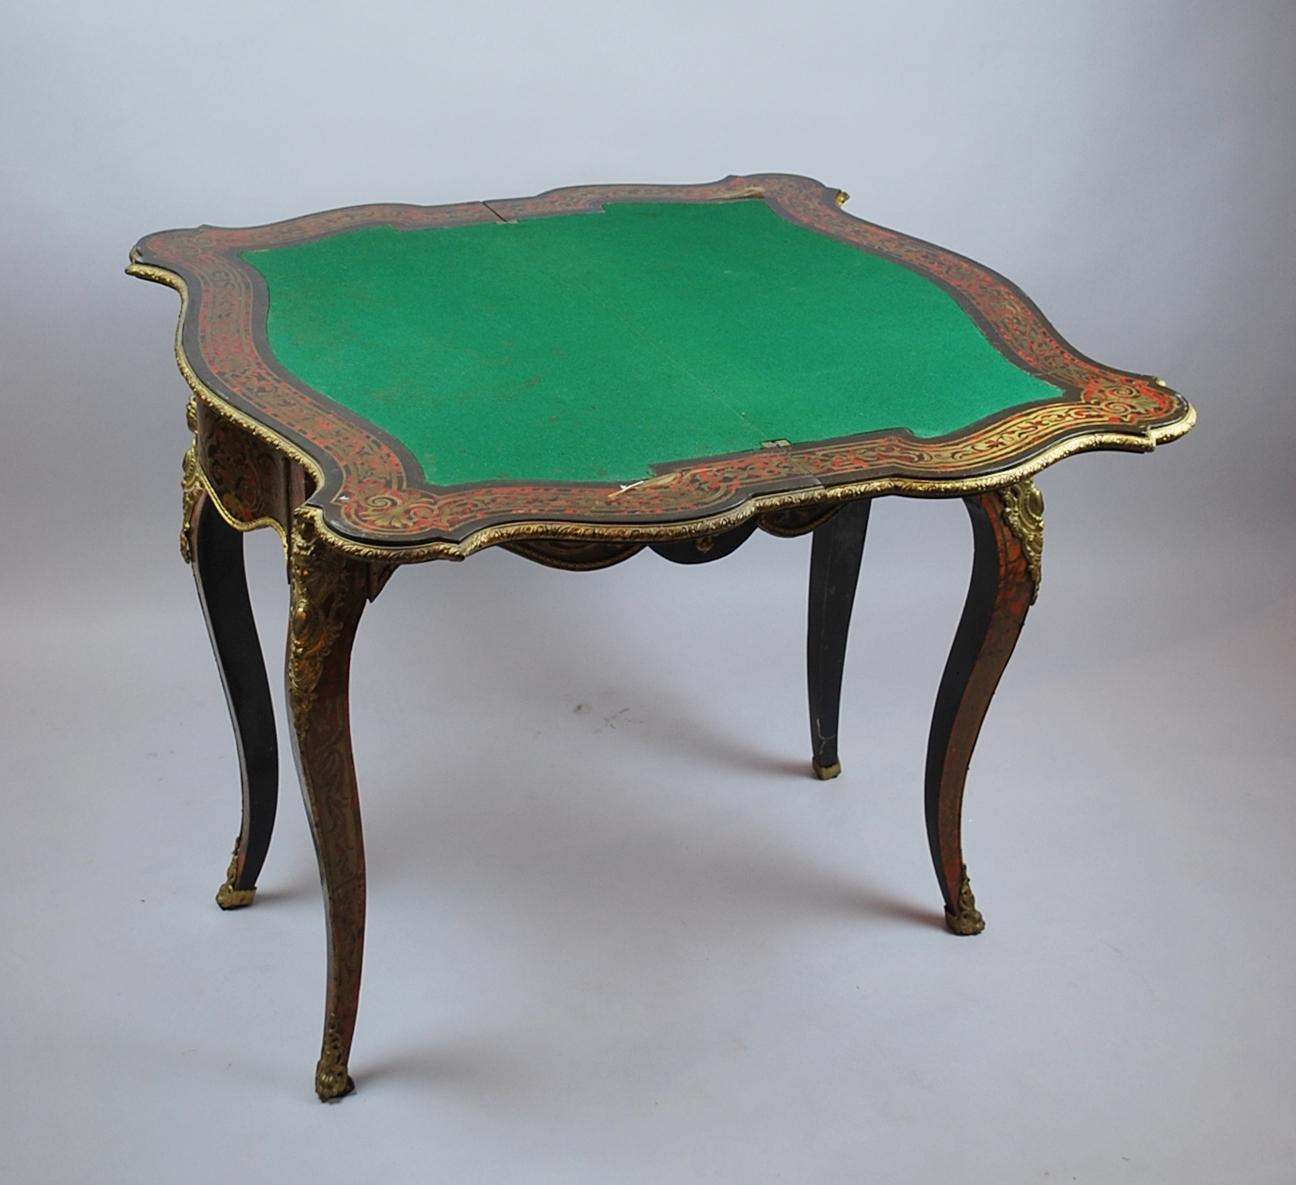 Louis XIV style game table with inlaid boule style, Napoleon III period - c.19th.